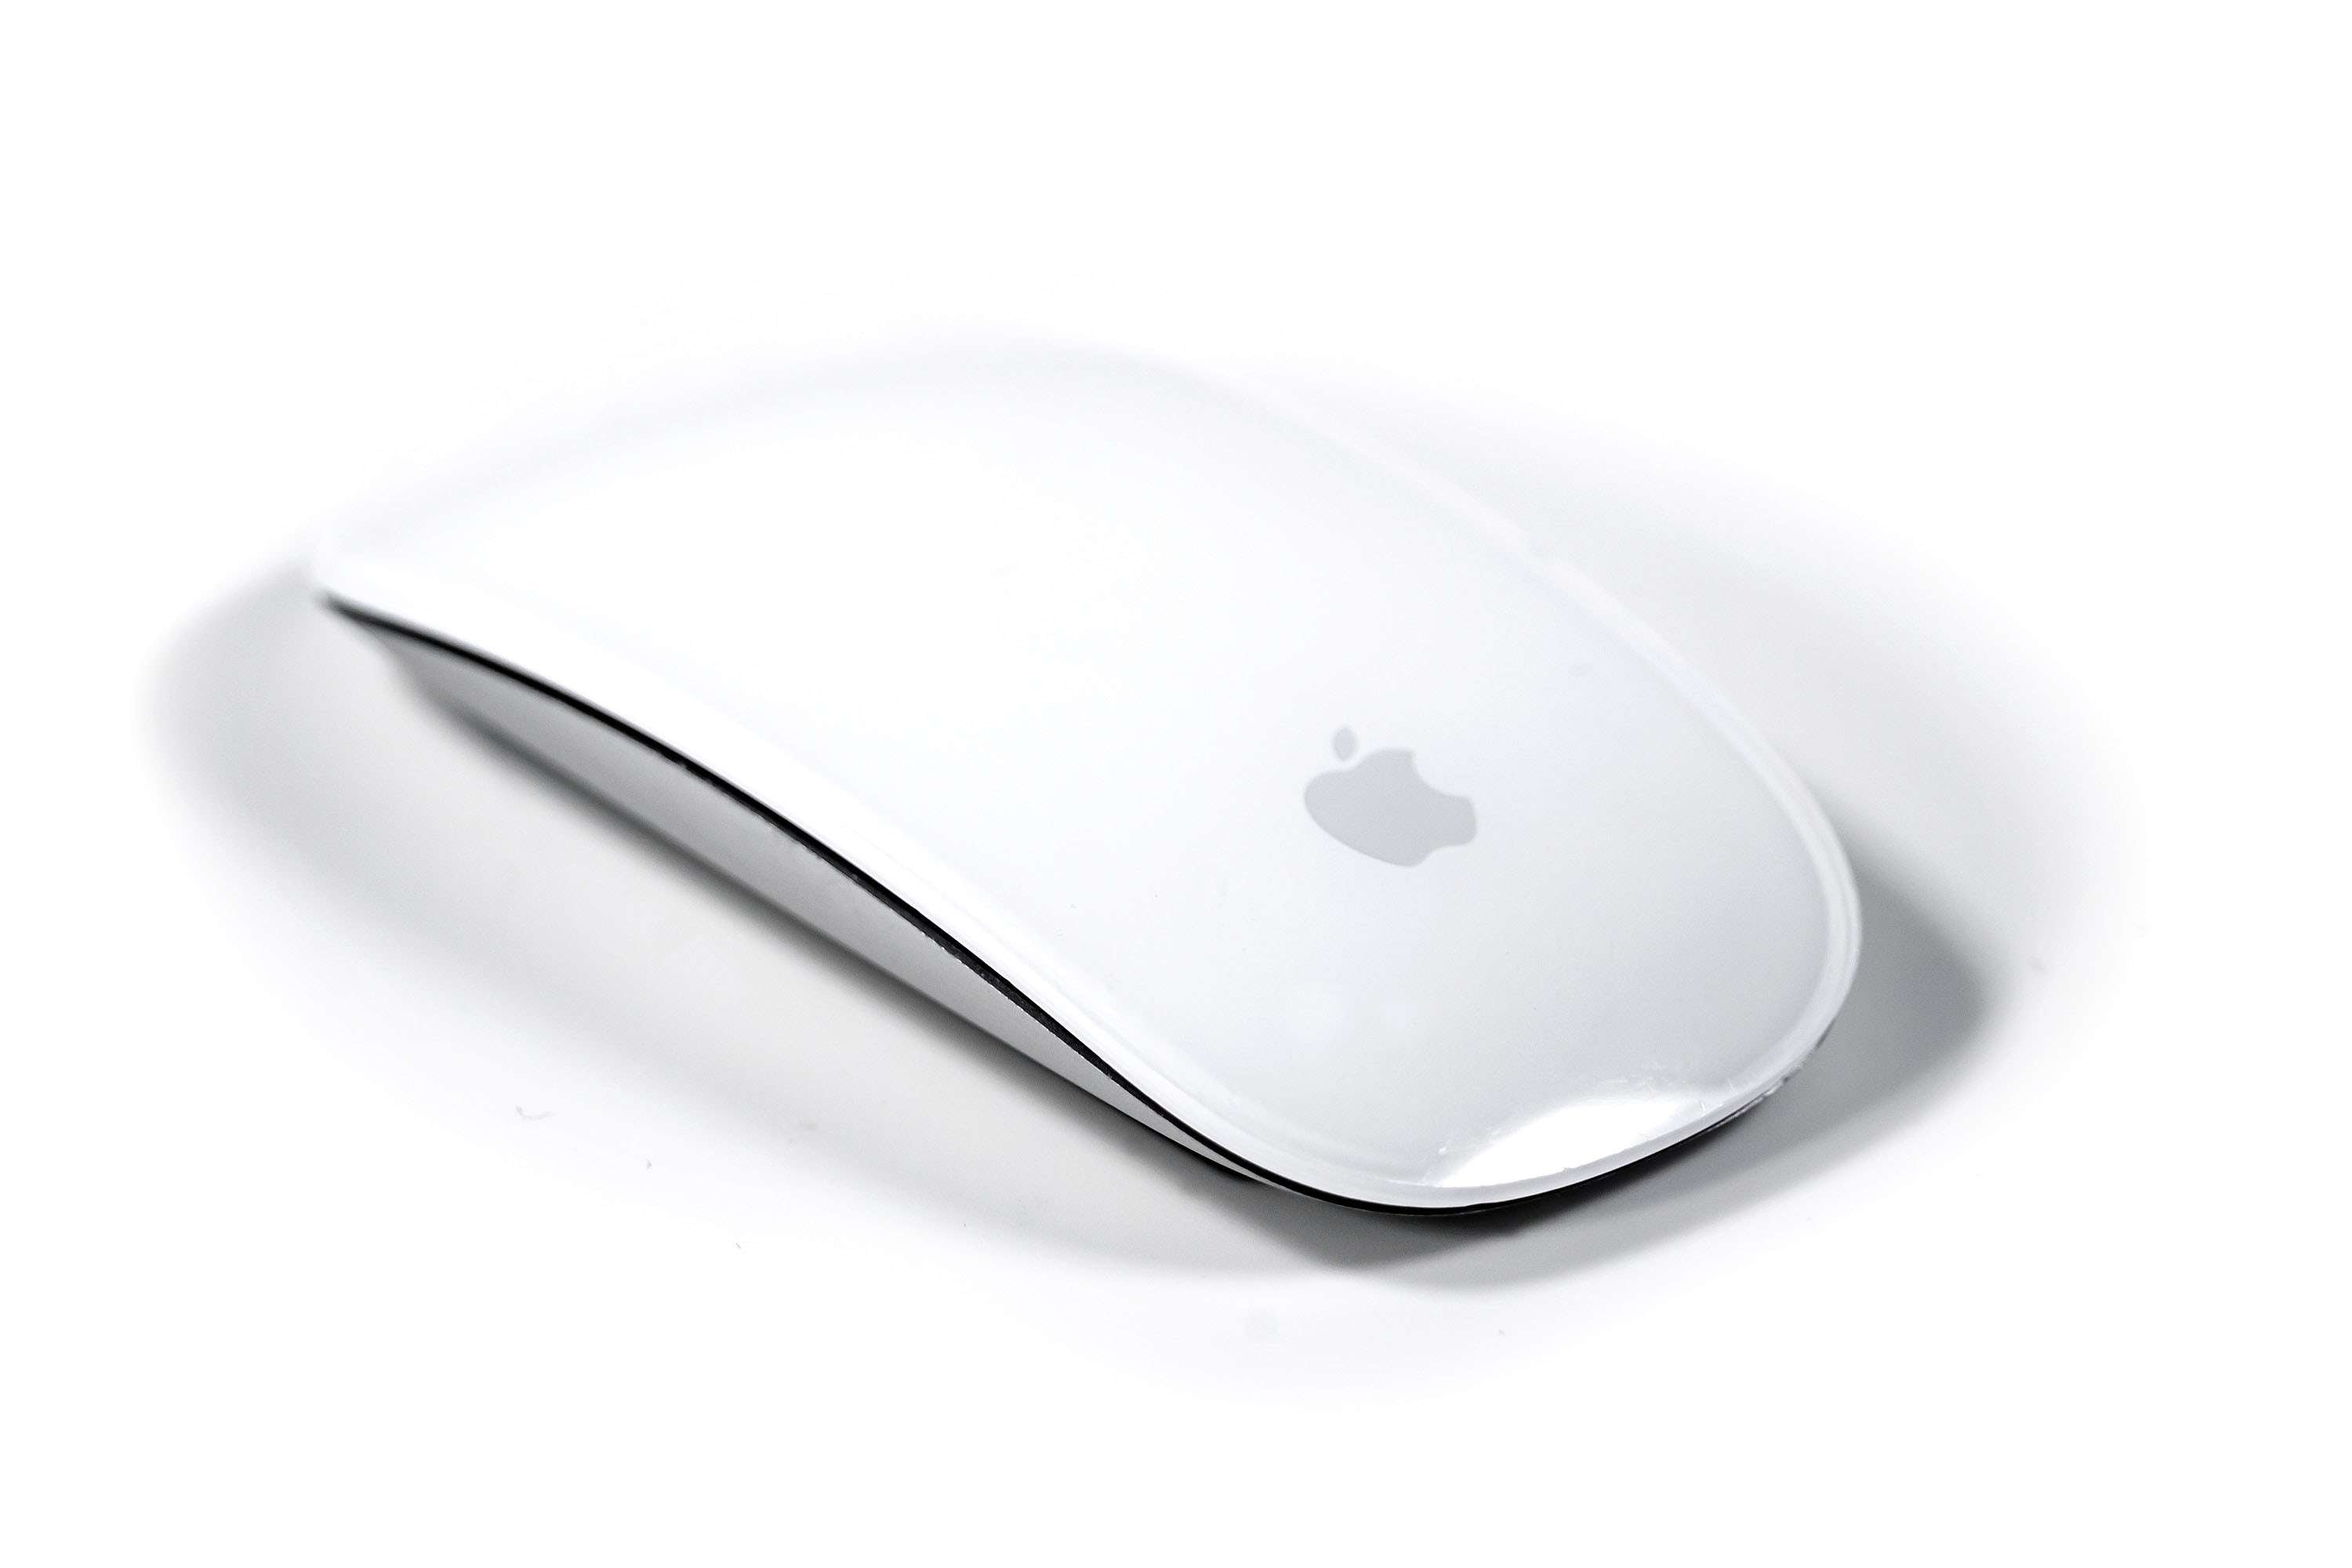 Buy Used & A1296 Bluetooth Accessories Wireless Mouse Apple MB829AM/A - Refurbished Apple Magic